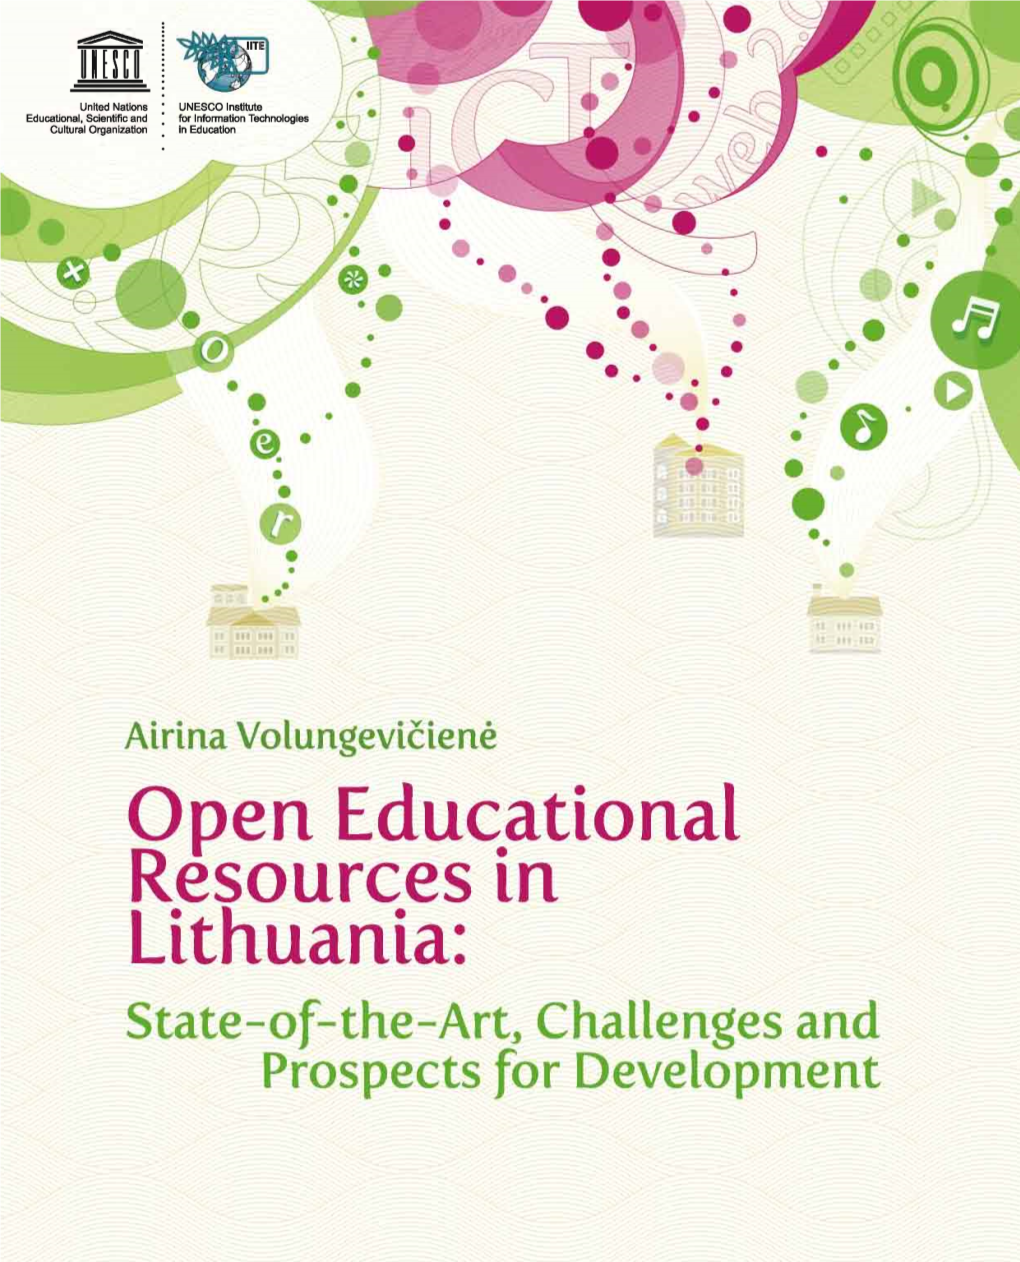 Open Educational Resources in Lithuania: State-Of-The-Art, Challenges and Prospects for Development UDC 37.01(474.5) Vo-133